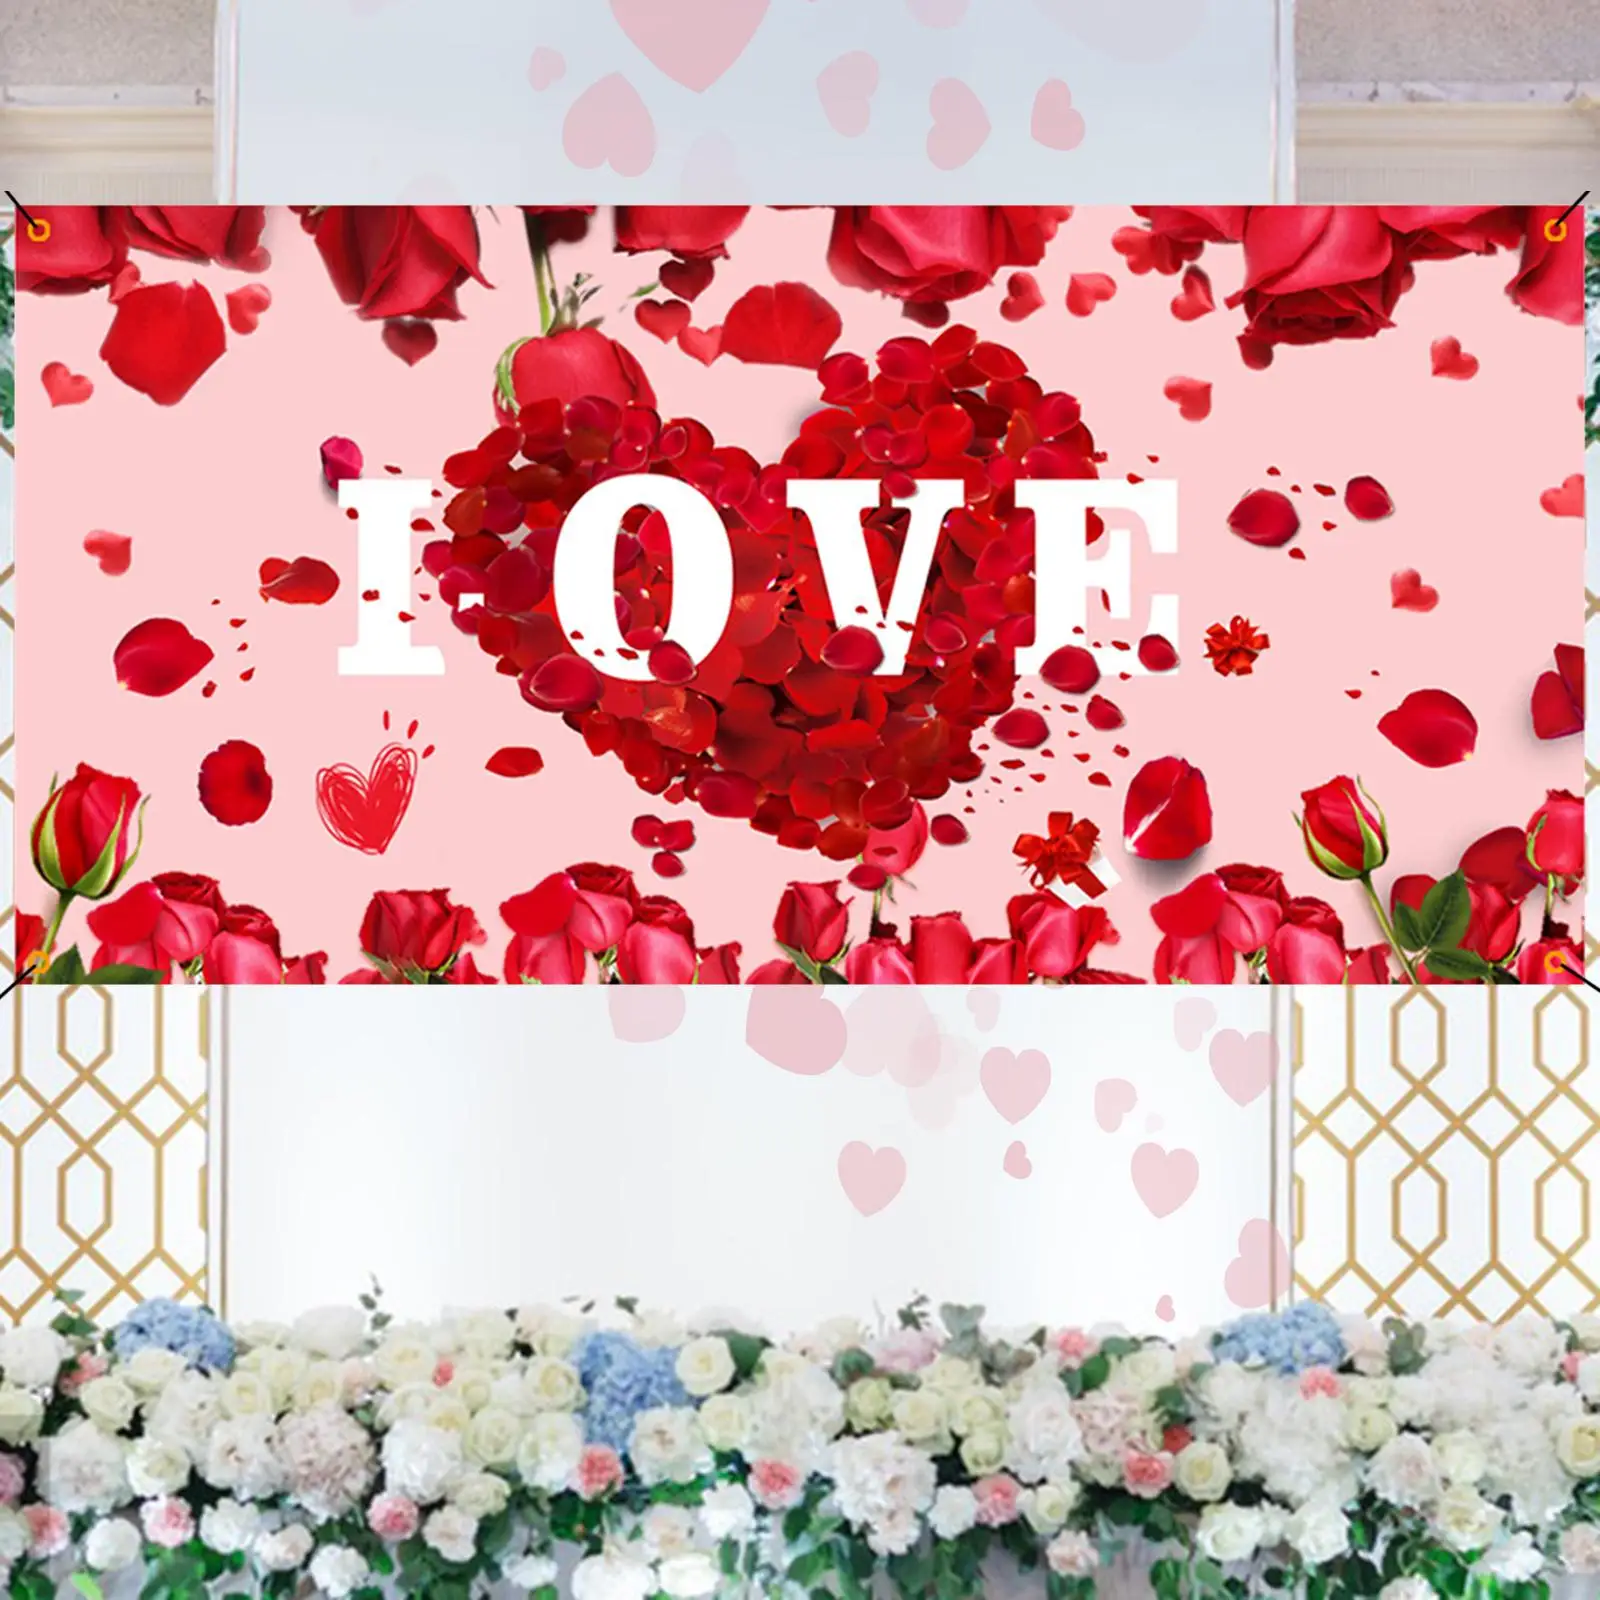 Valentine`s Day Backdrop Banner DIY Heart Background Valentines Day Decor for Bedroom Party Favor Anniversary Wedding Photoshoot